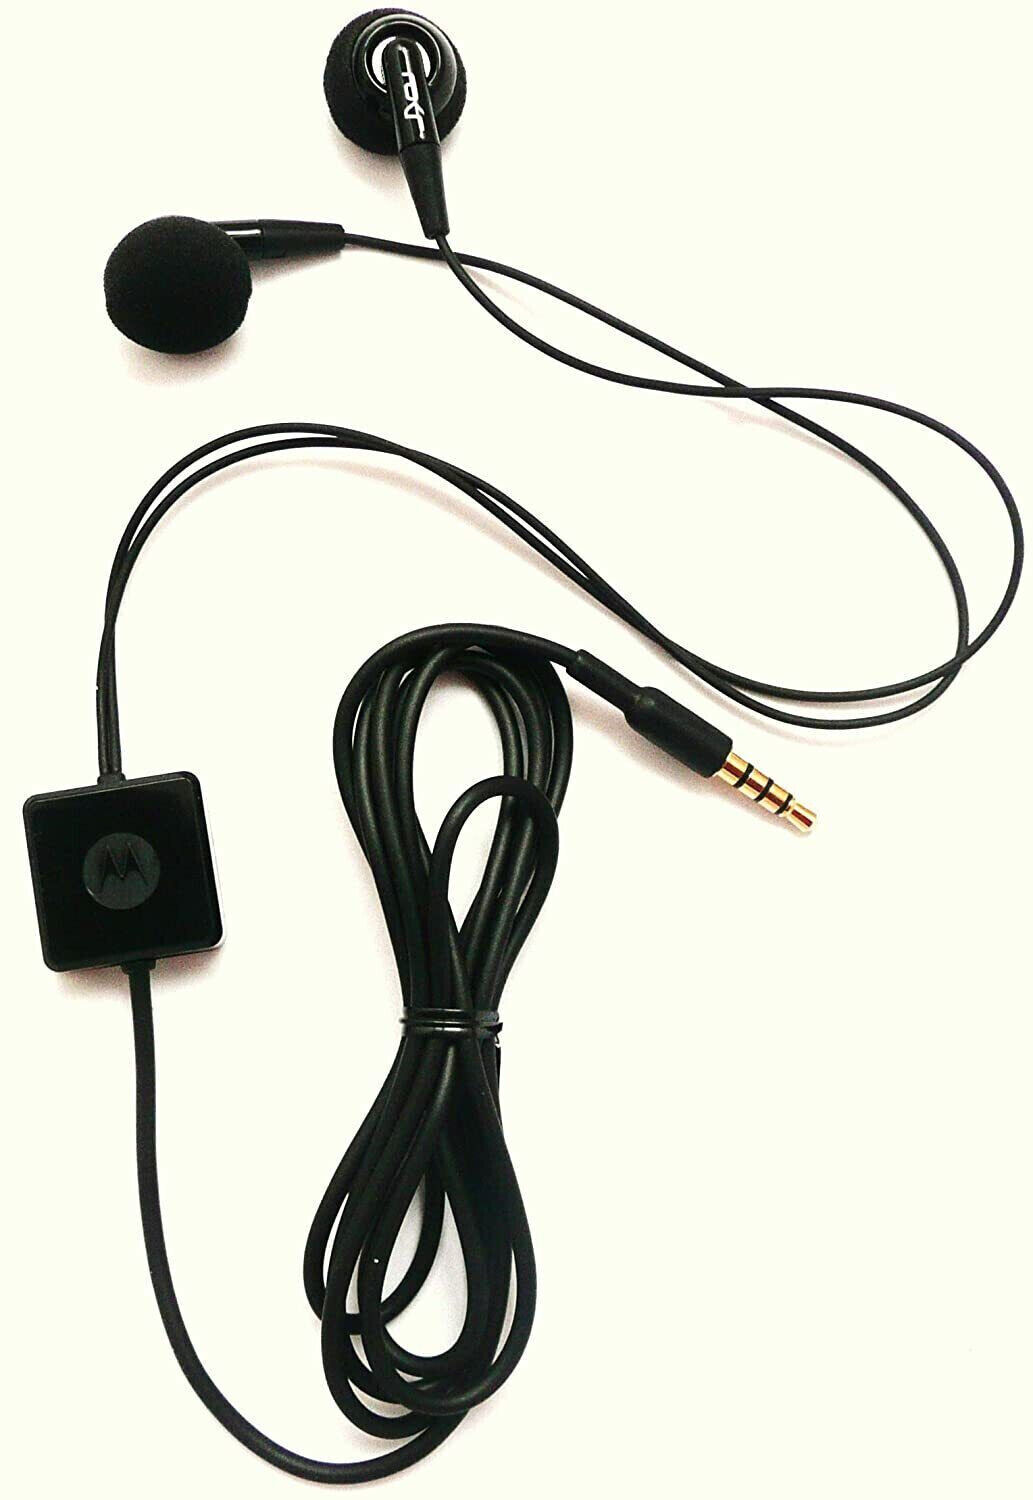 Primary image for Motorola Wired Stereo HandsFree In Ear Motozine ZN5 Krave ZN4 HINT QA3 E8 3.5mm